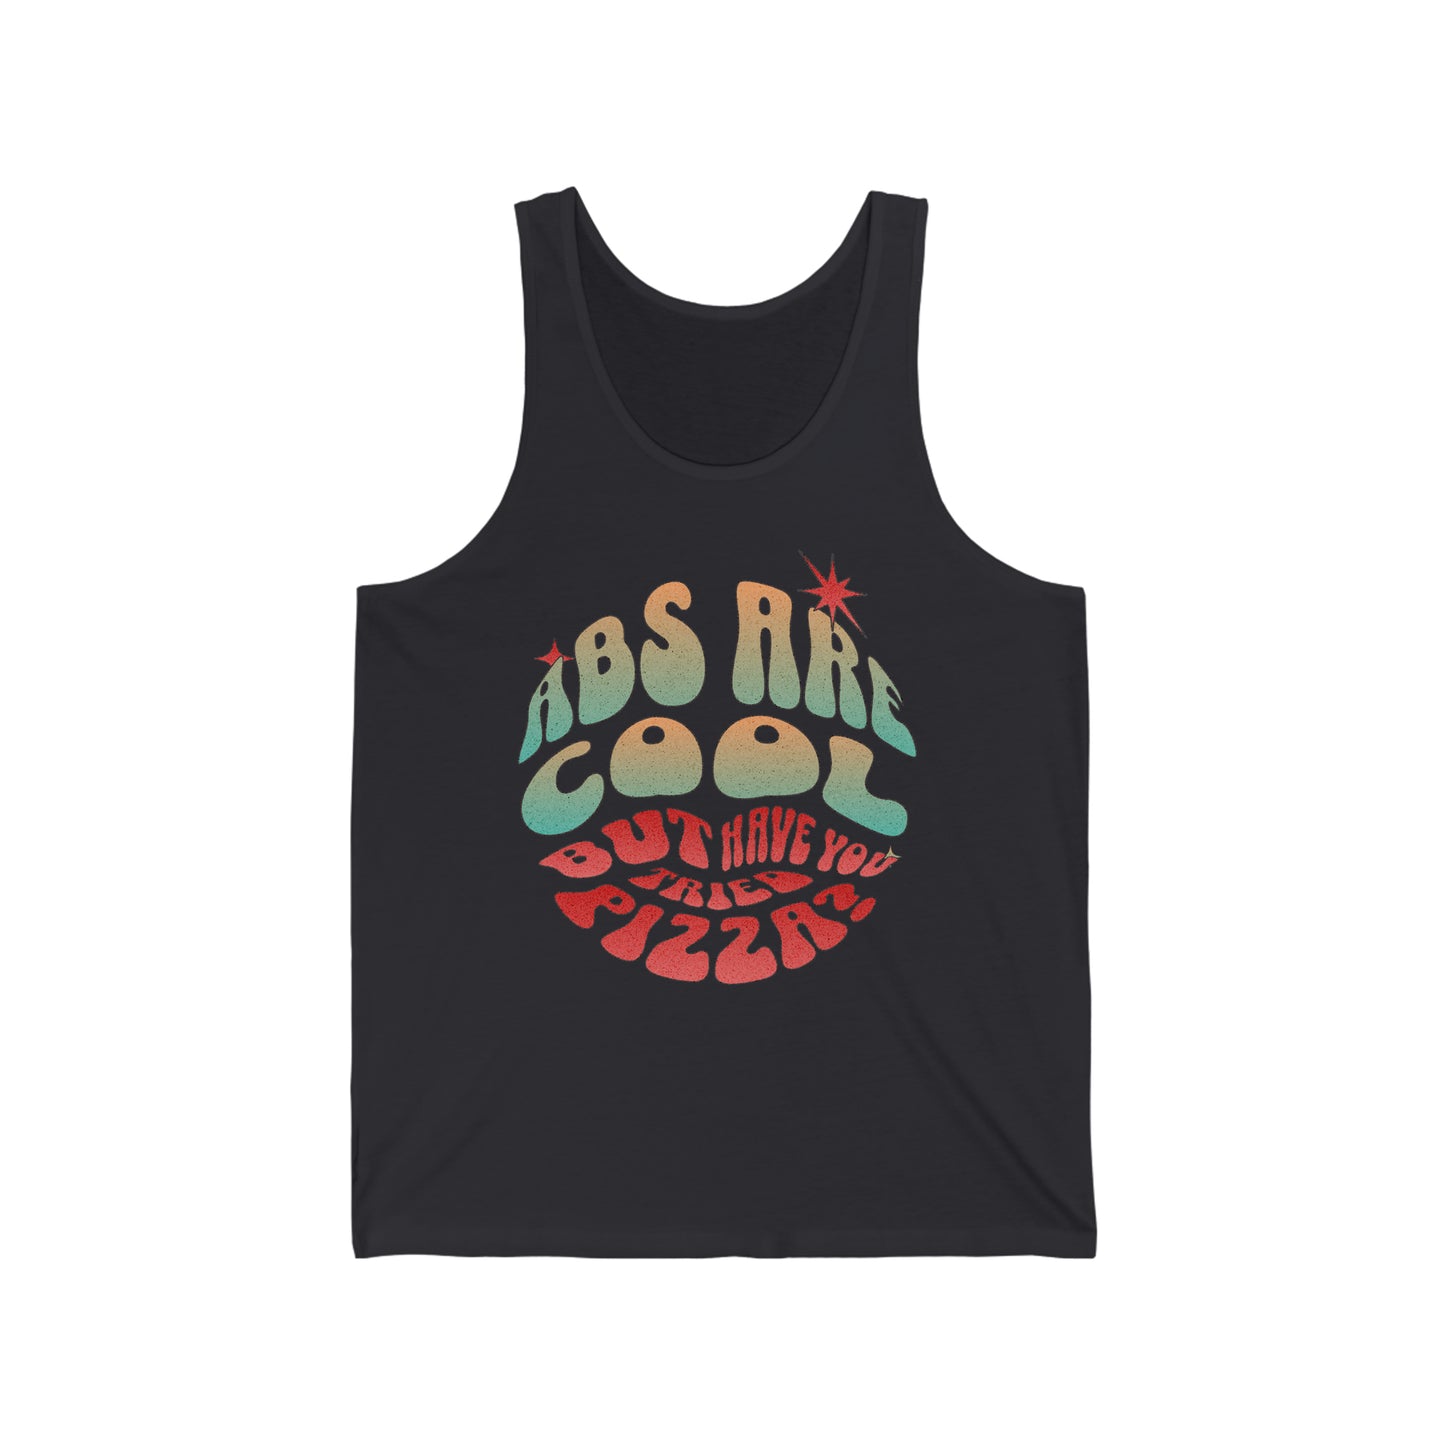 "Abs Are Cool But Have You Tried Pizza?" Unisex Jersey Tank